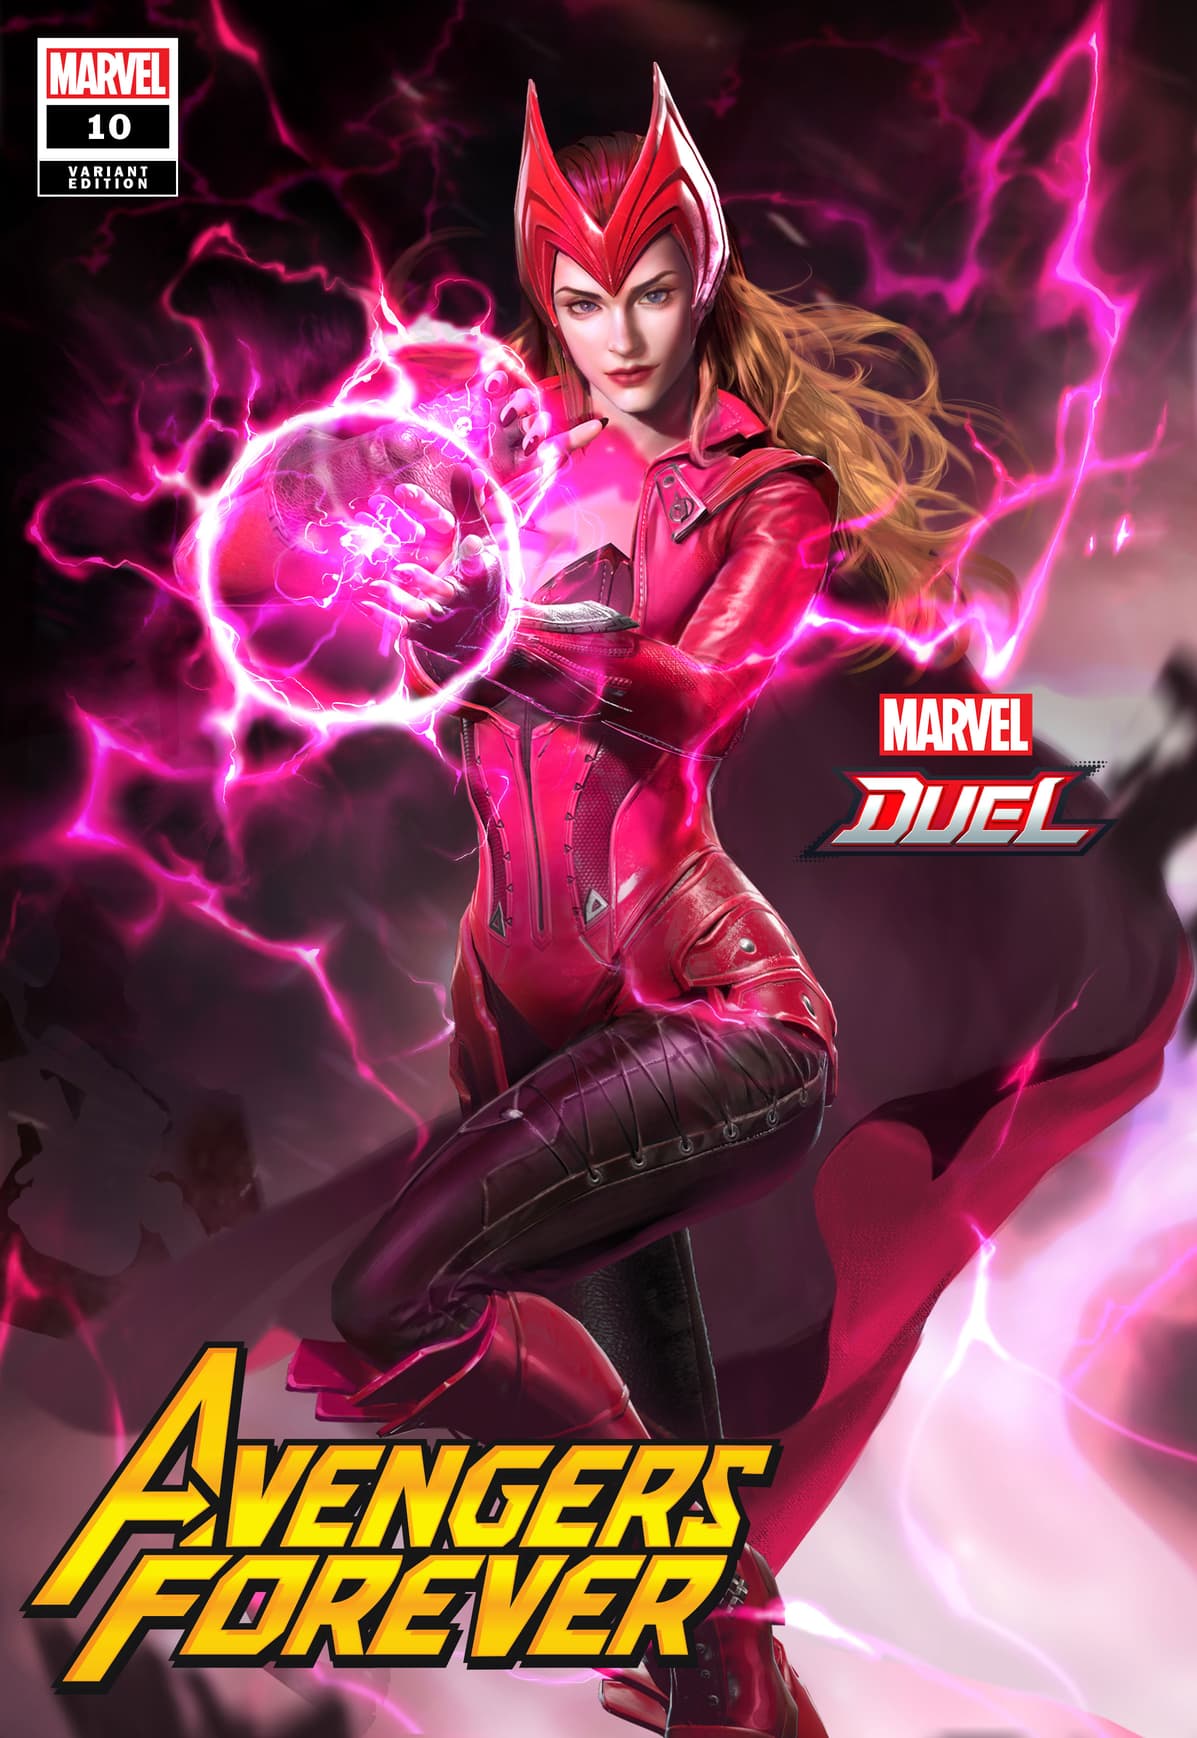 AVENGERS FOREVER #10 GAMES VARIANT COVER by NETEASE GAMES